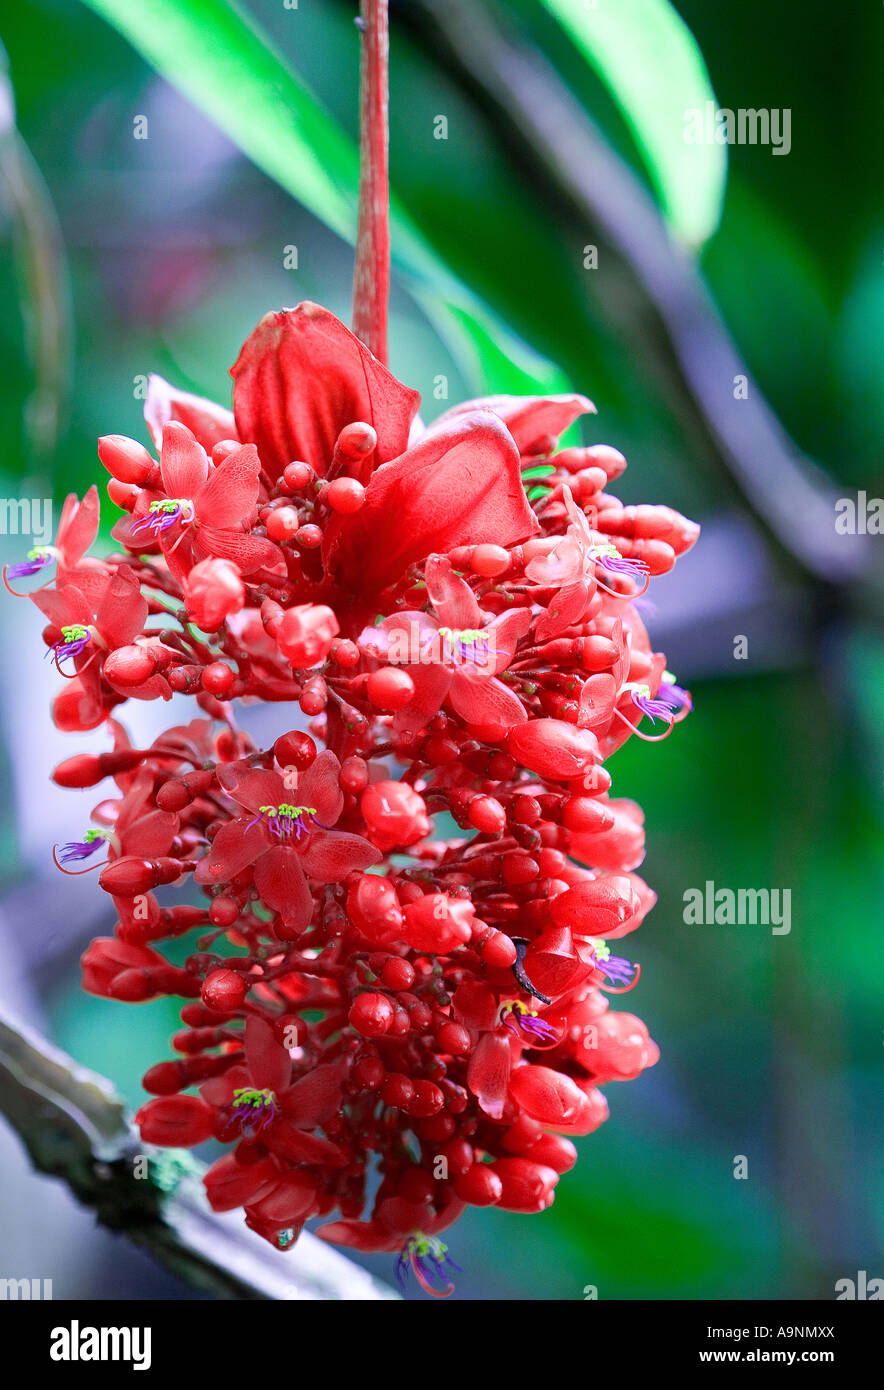 Image of a Wheel of Fire cluster of reddish pink flowers hanging from a branch standing out from a blurred green background Stock Photo